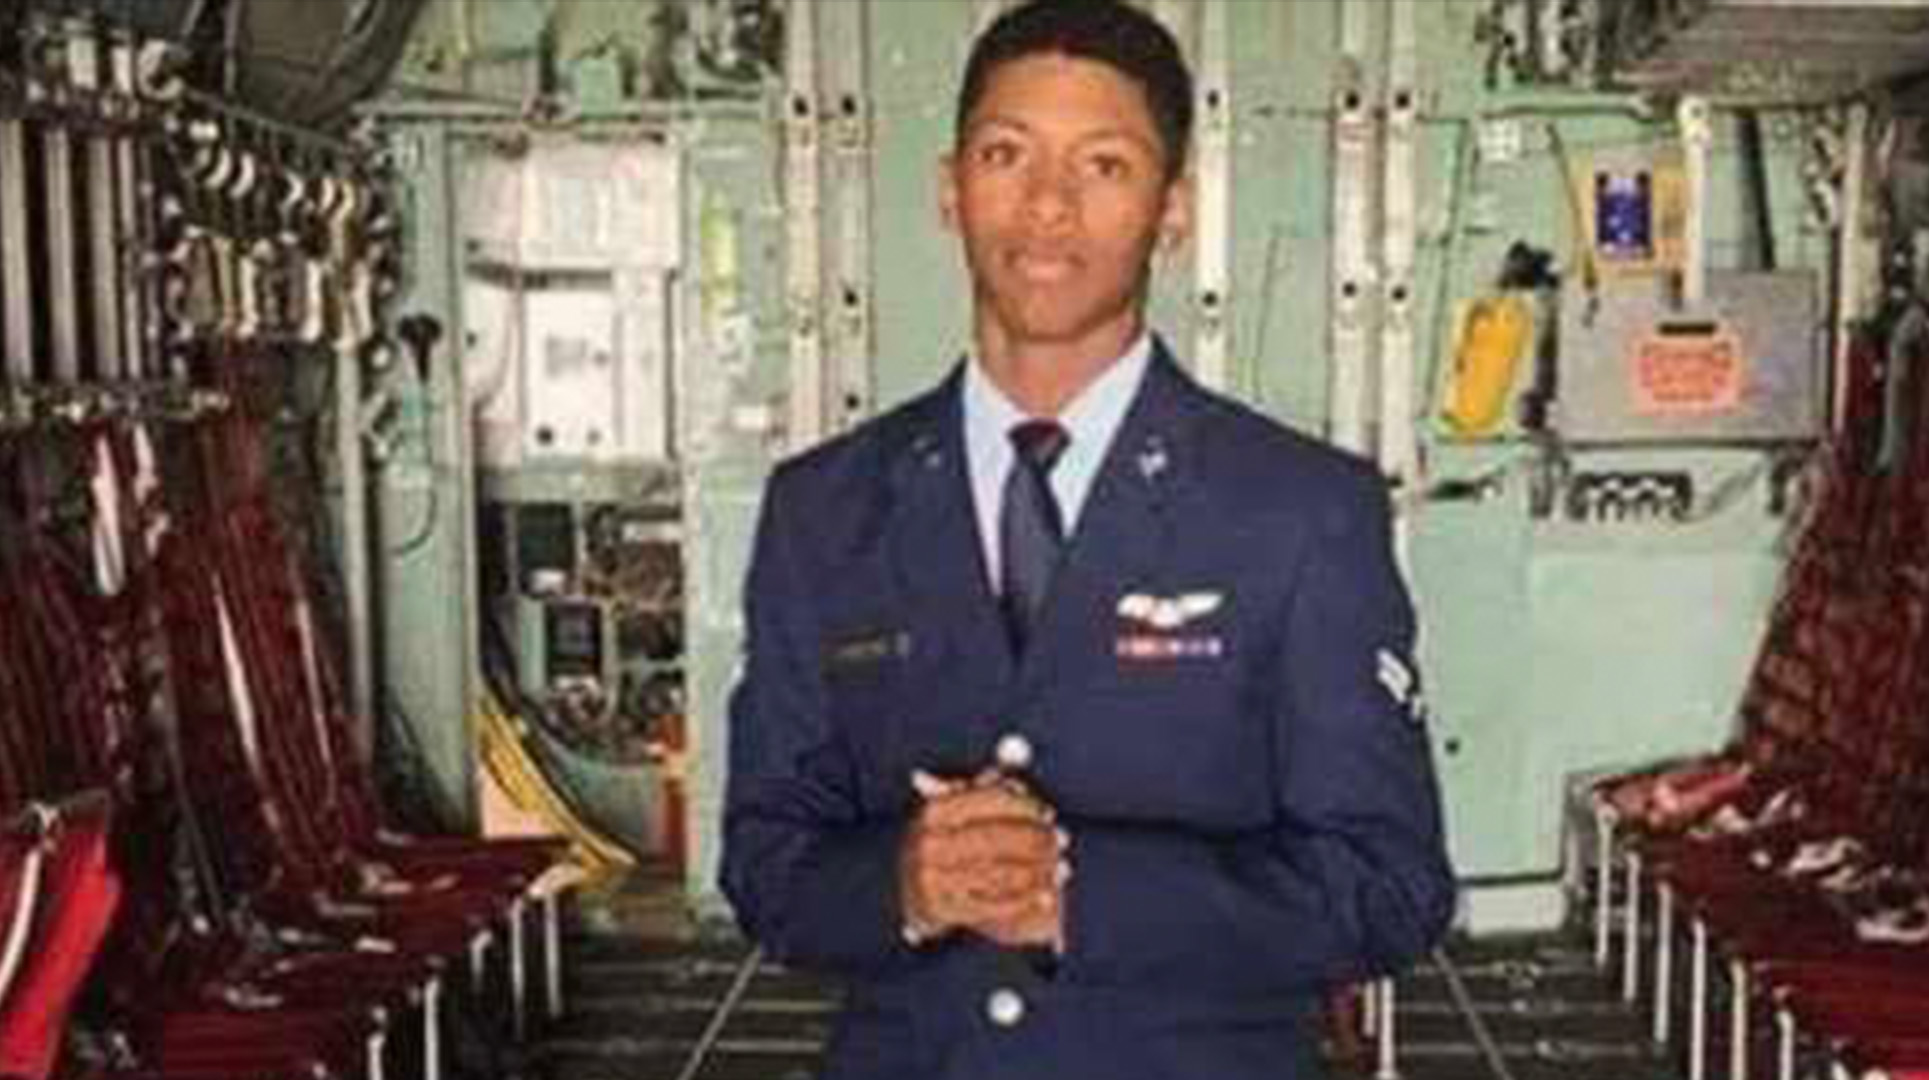 Senior Airman Roger Fortson was killed in a shooting incident with a Okaloosa County Sheriff's deputy on May 3. As a Special Missions Aviator, Fortson flew as aircrew on the AC-130J Ghostrider gunships with the 4th Special Operations Squadron. Photo provided to Task & Purpose.